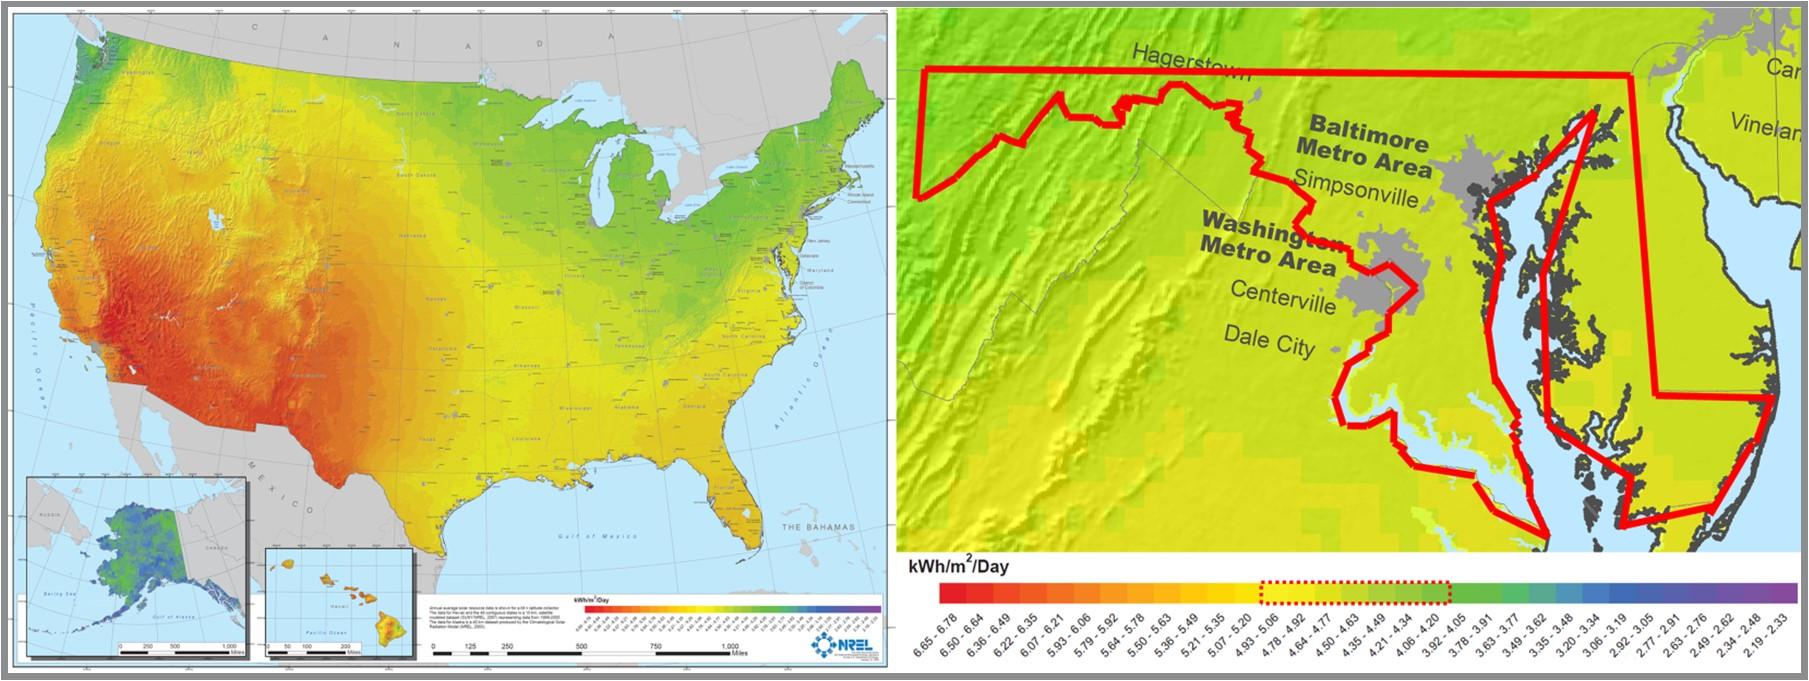 Annual average solar resource for a flat plate collector tilted at latitude for United States (left) and Maryland (right) (Roberts, 2008).